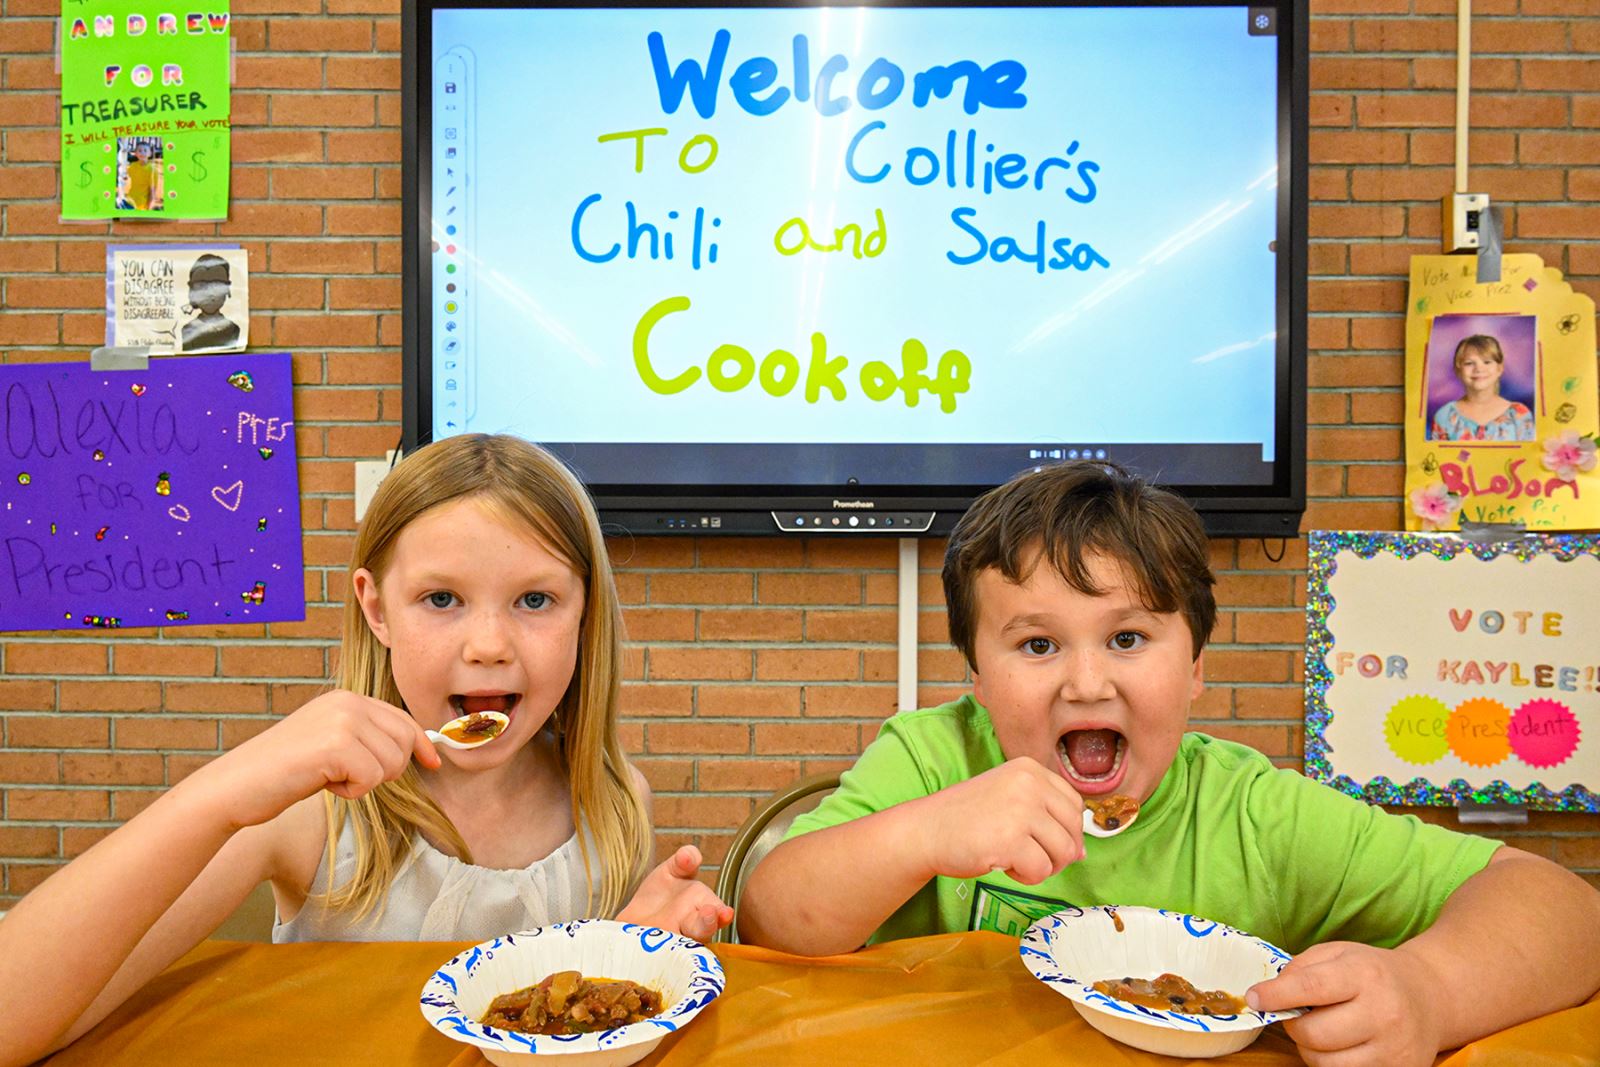 Collier students dig into their bowls of chili.